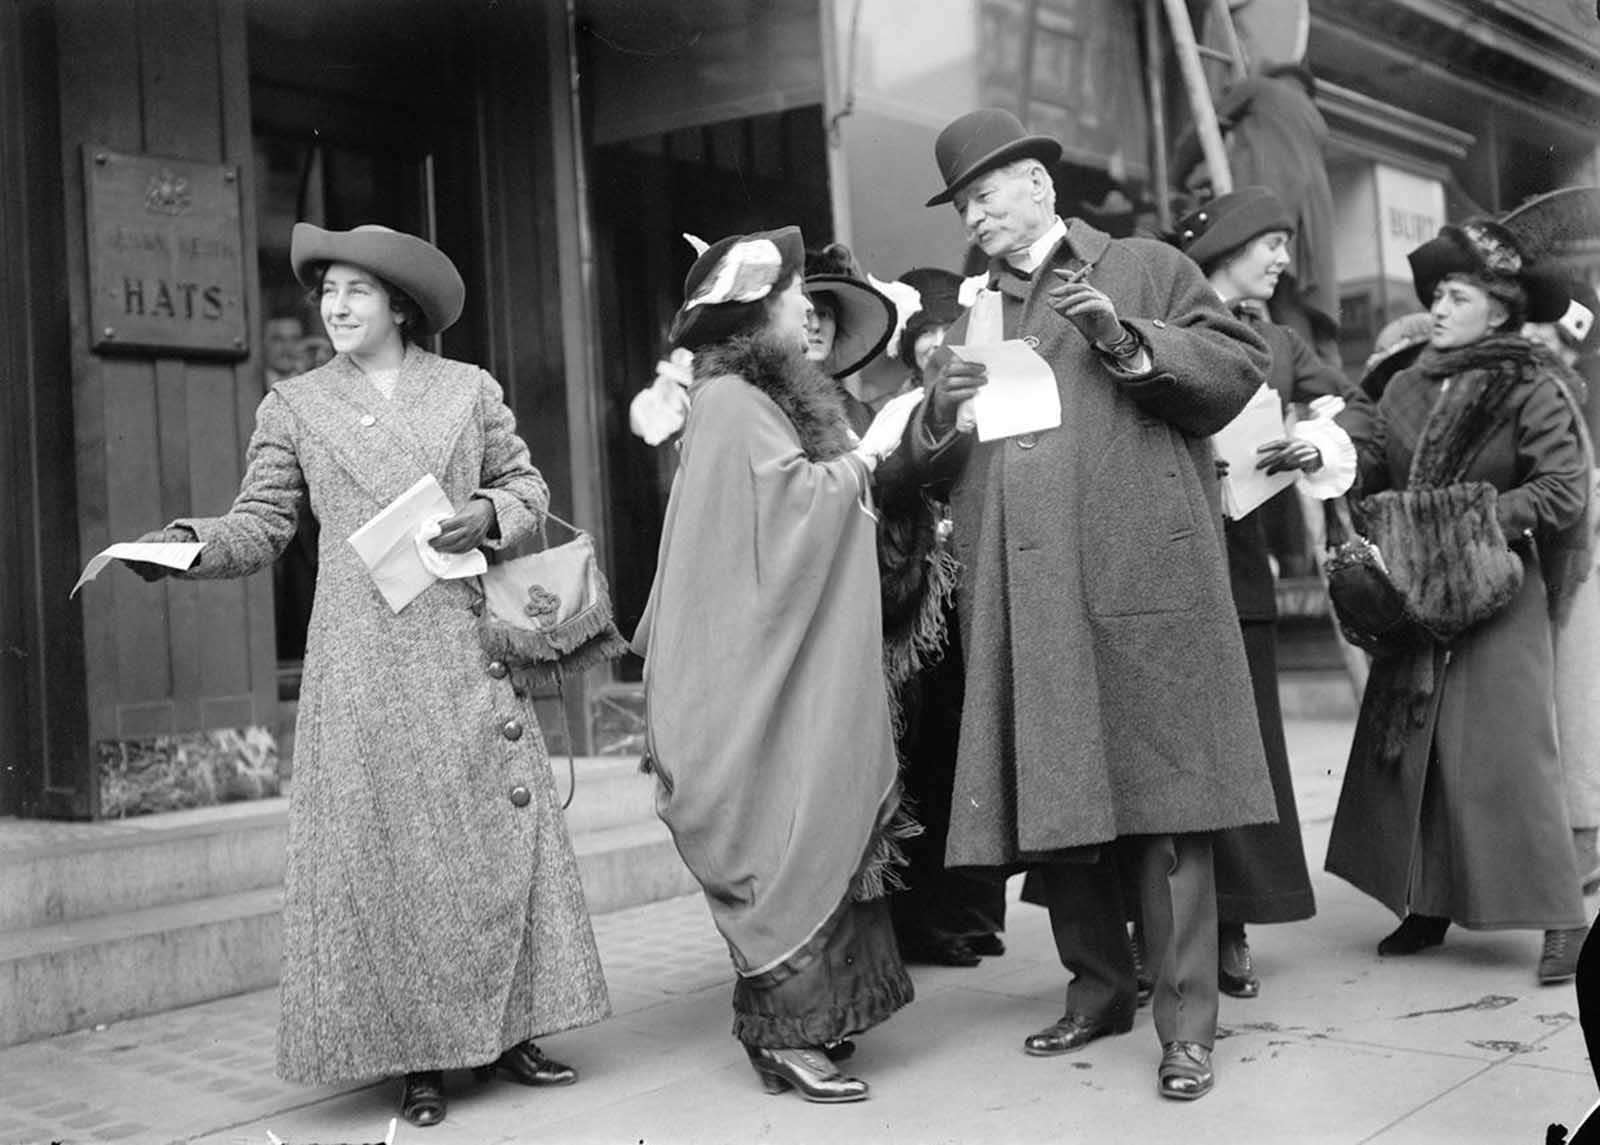  Suffragists hand out flyers advertising the upcoming parade, 1913. 